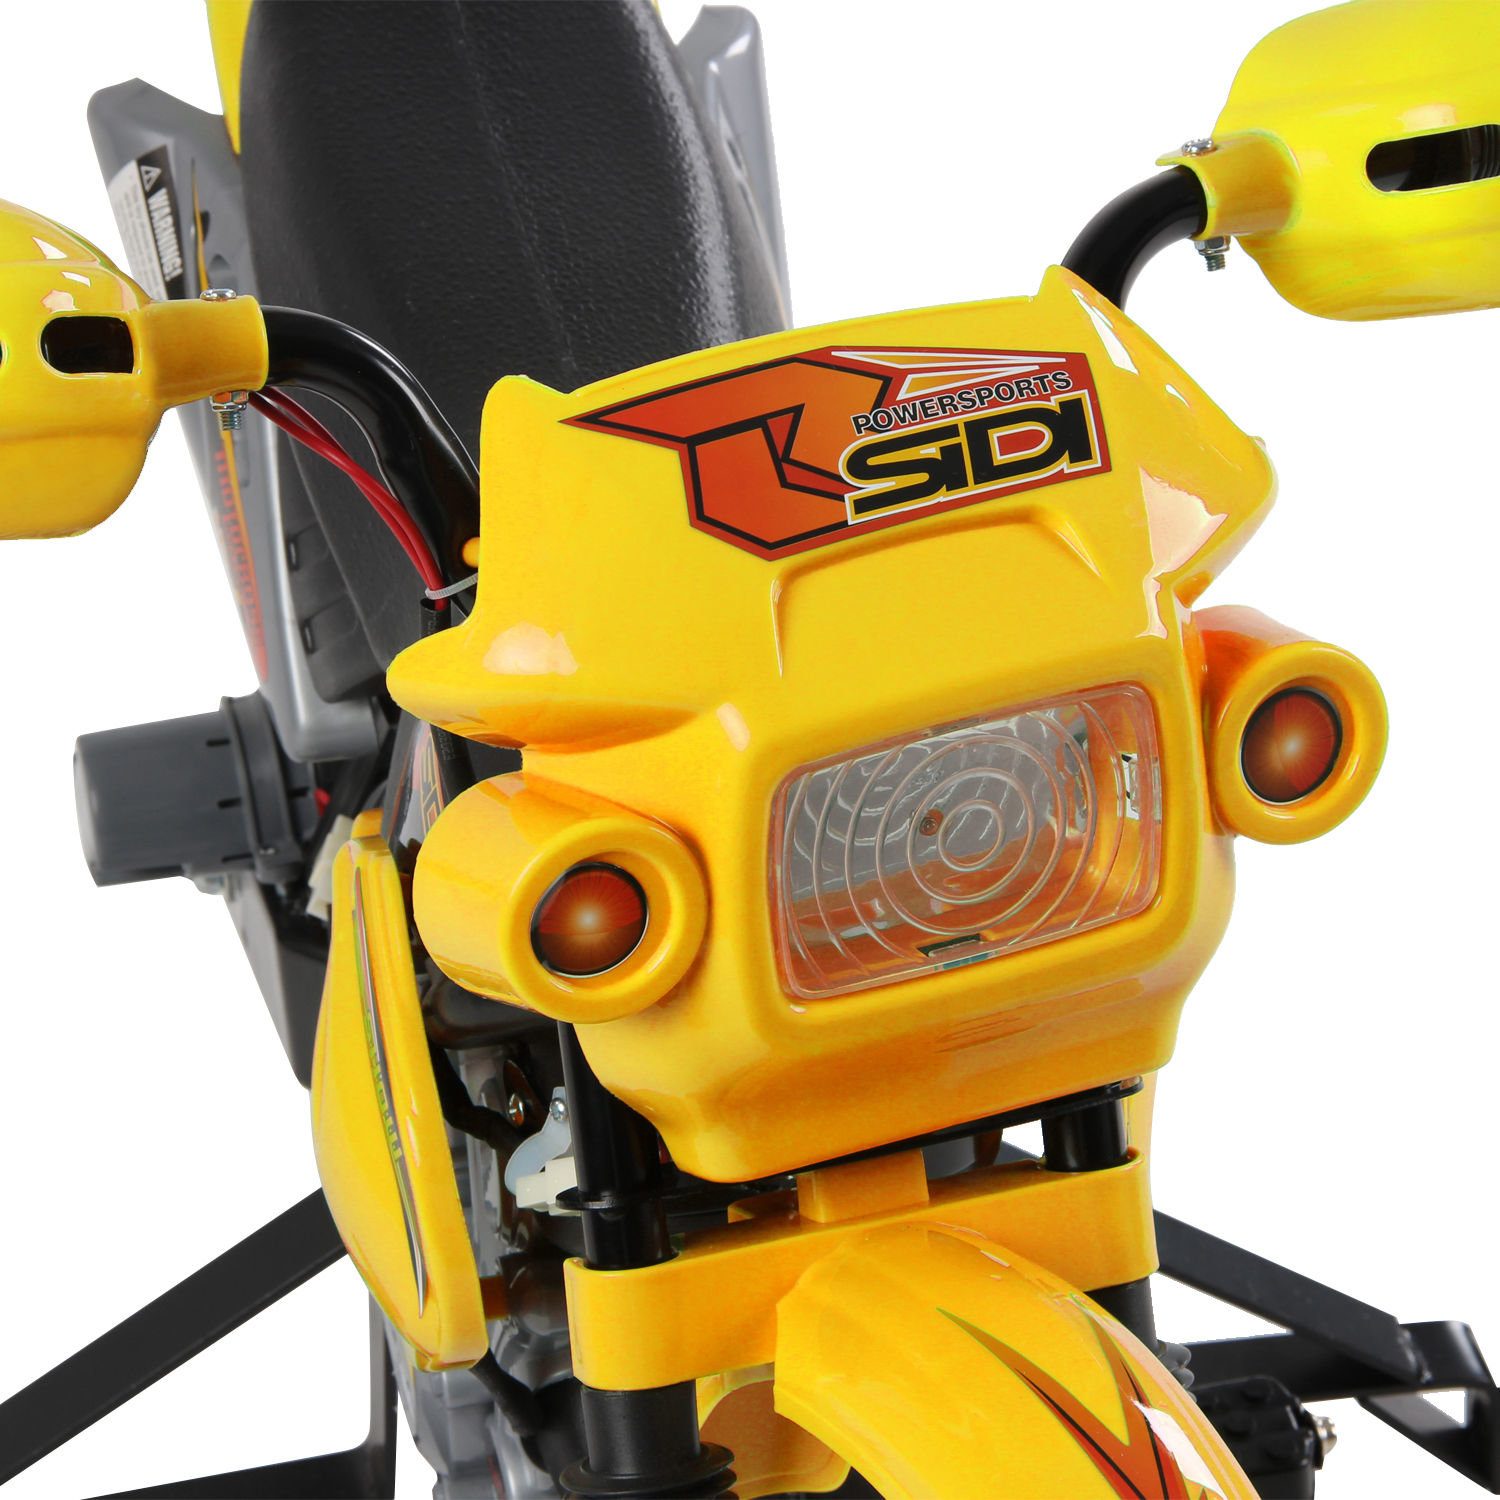 HOMCOM Kid's Yellow Ride-On Electric Motorbike | Battery Powered Toy Motorcycle